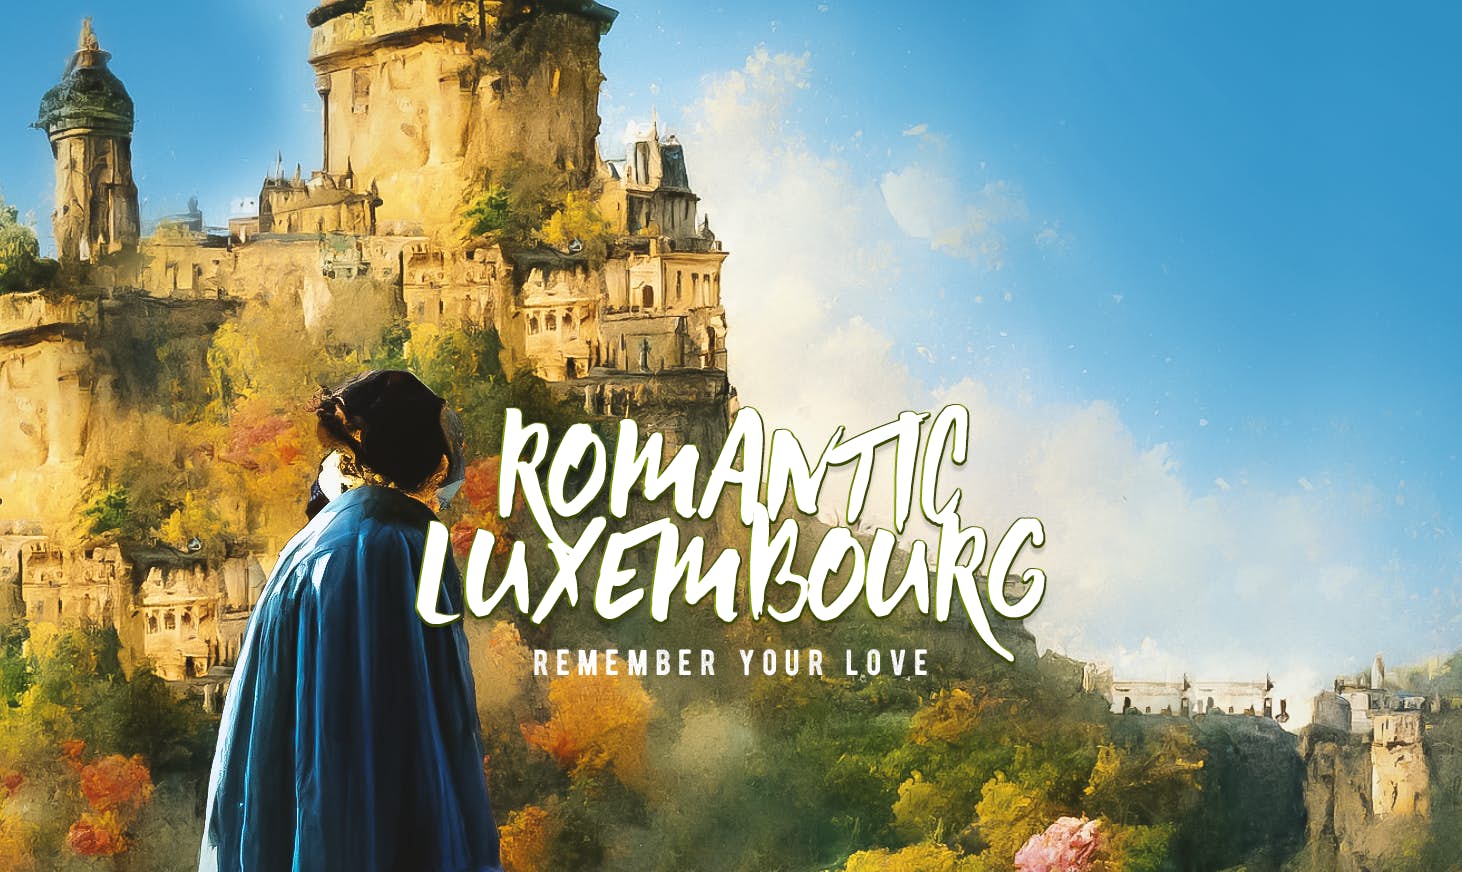 Romantic Luxembourg: Remember Your Love! image